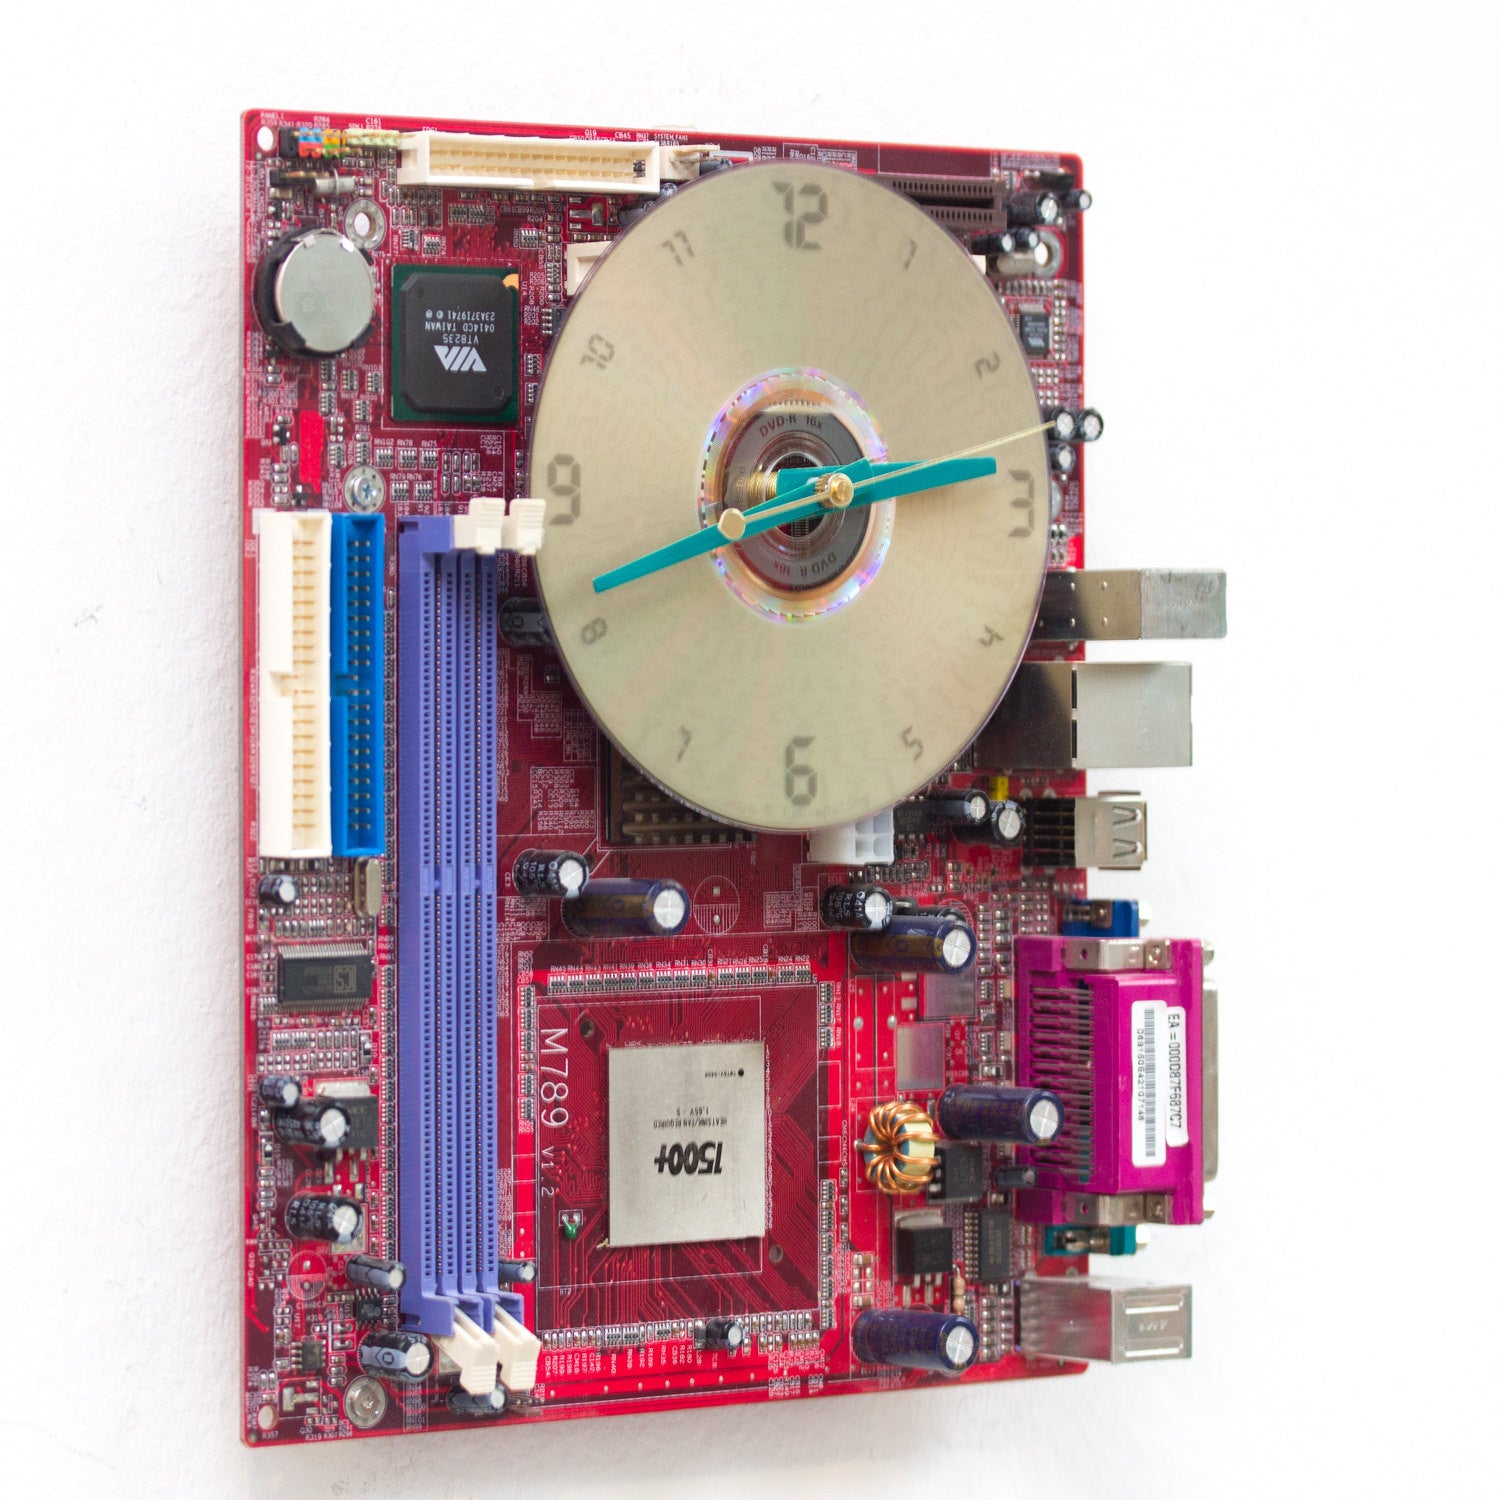 Wall Clock made of red Circuit Board